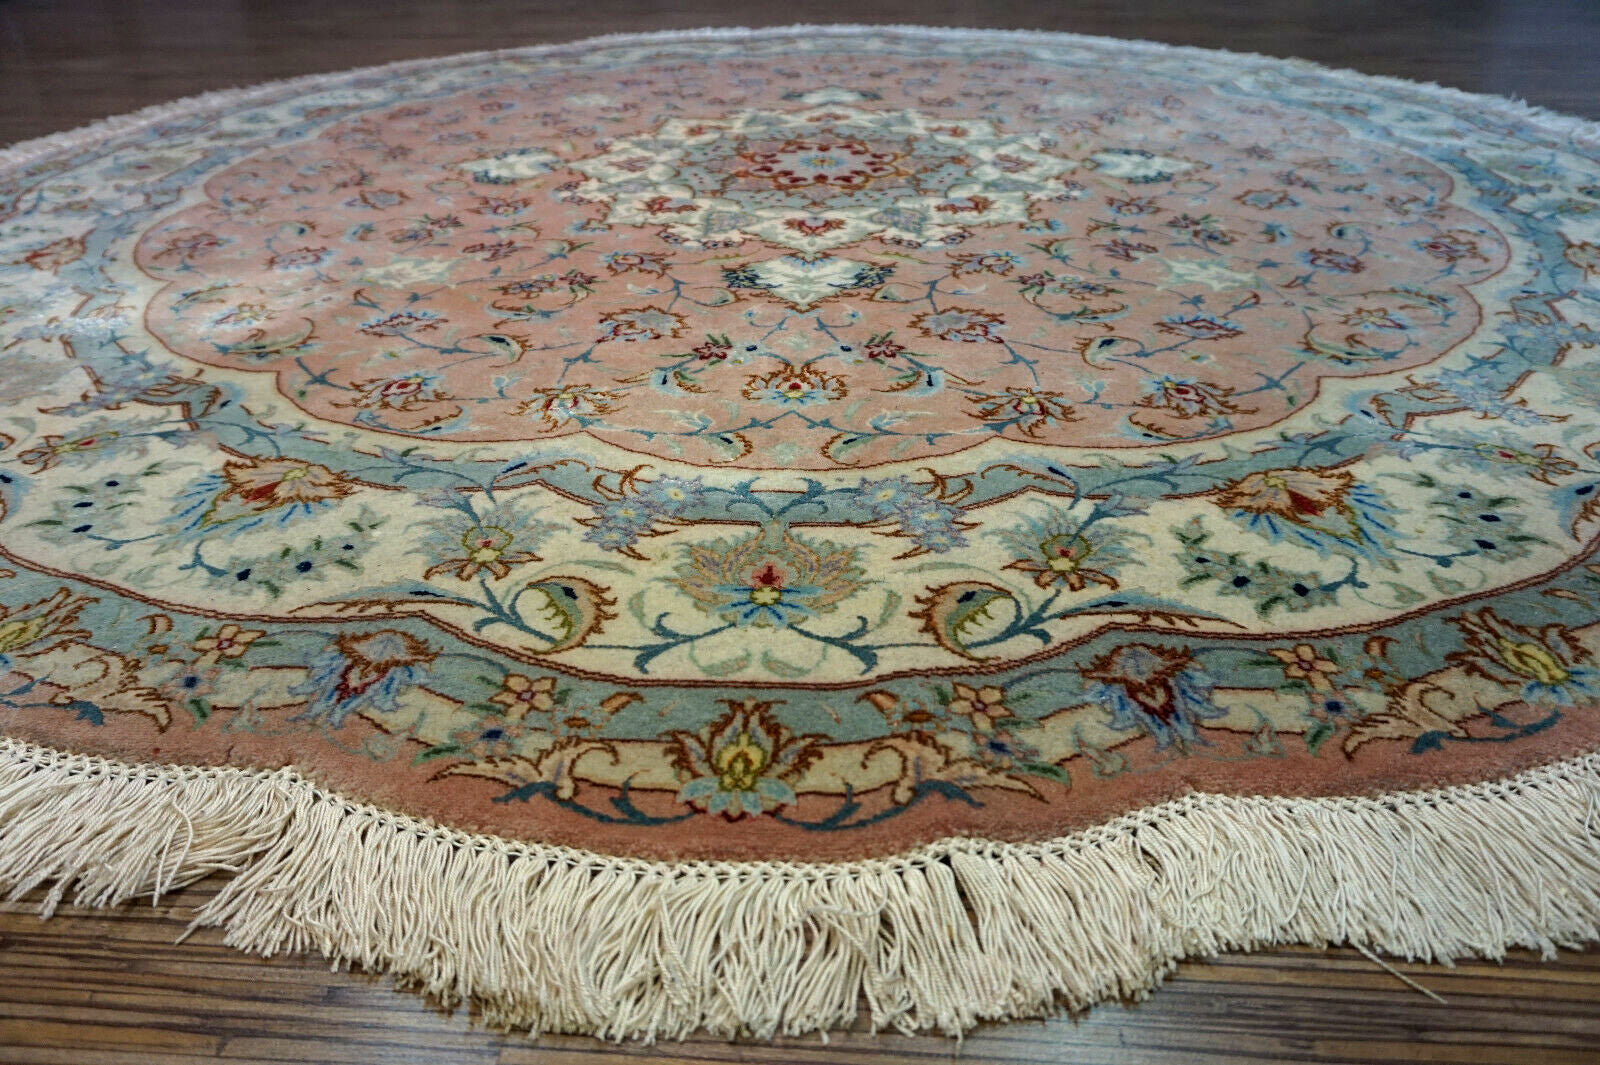 Close-up of Floral Pattern on Handmade Rug